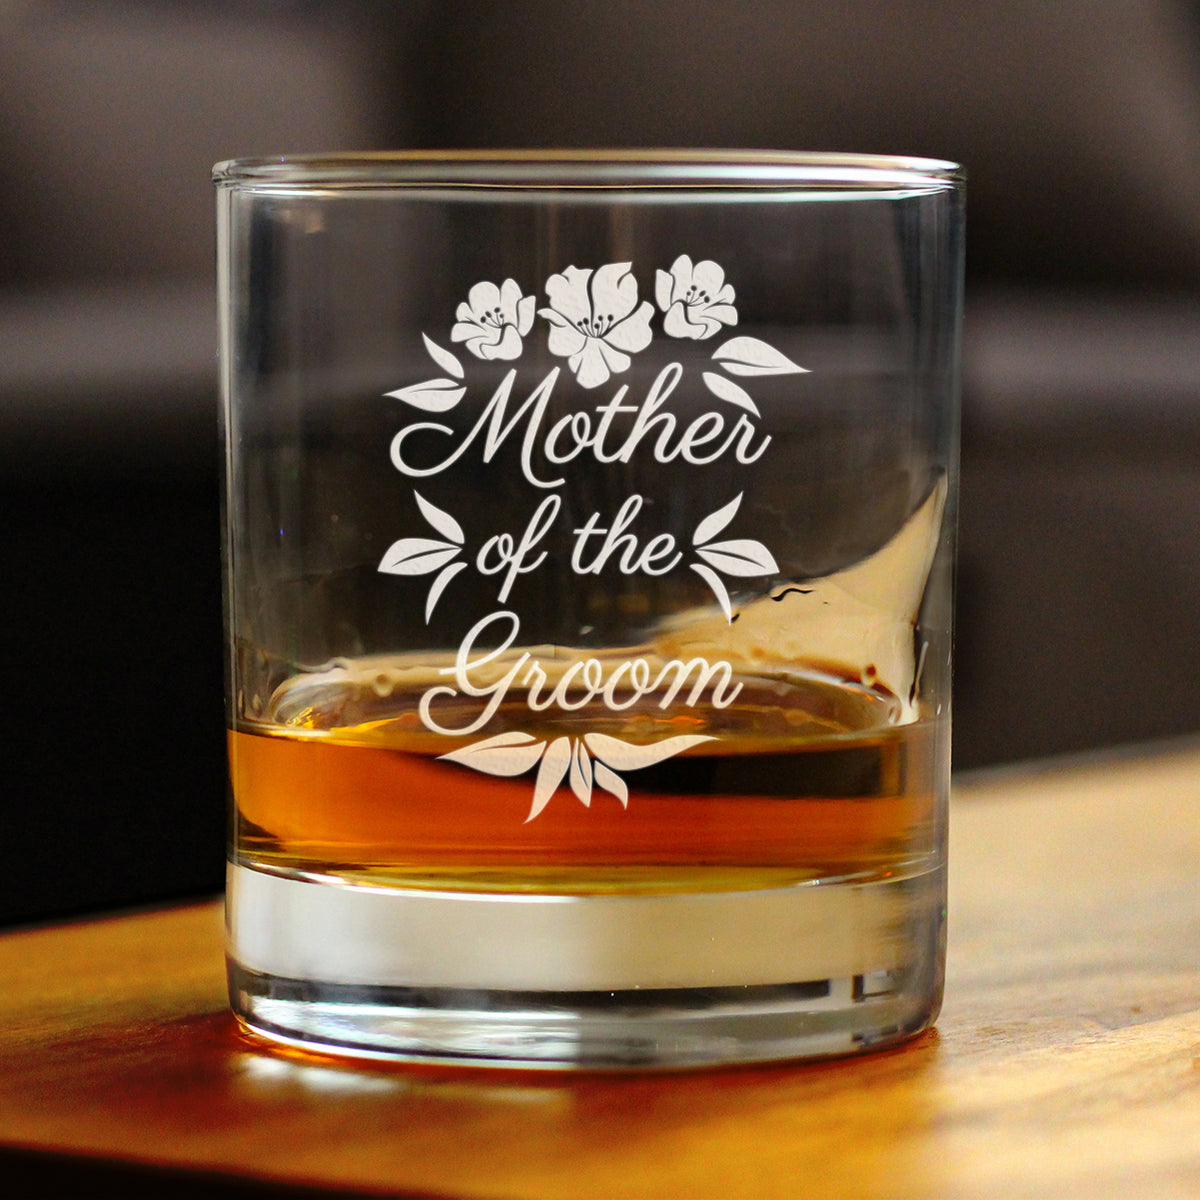 Mother of the Groom Old Fashioned Rocks Glass - Unique Wedding Gift for Soon to Be Mother-in-Law - Cute Engraved Wedding Cup Gift